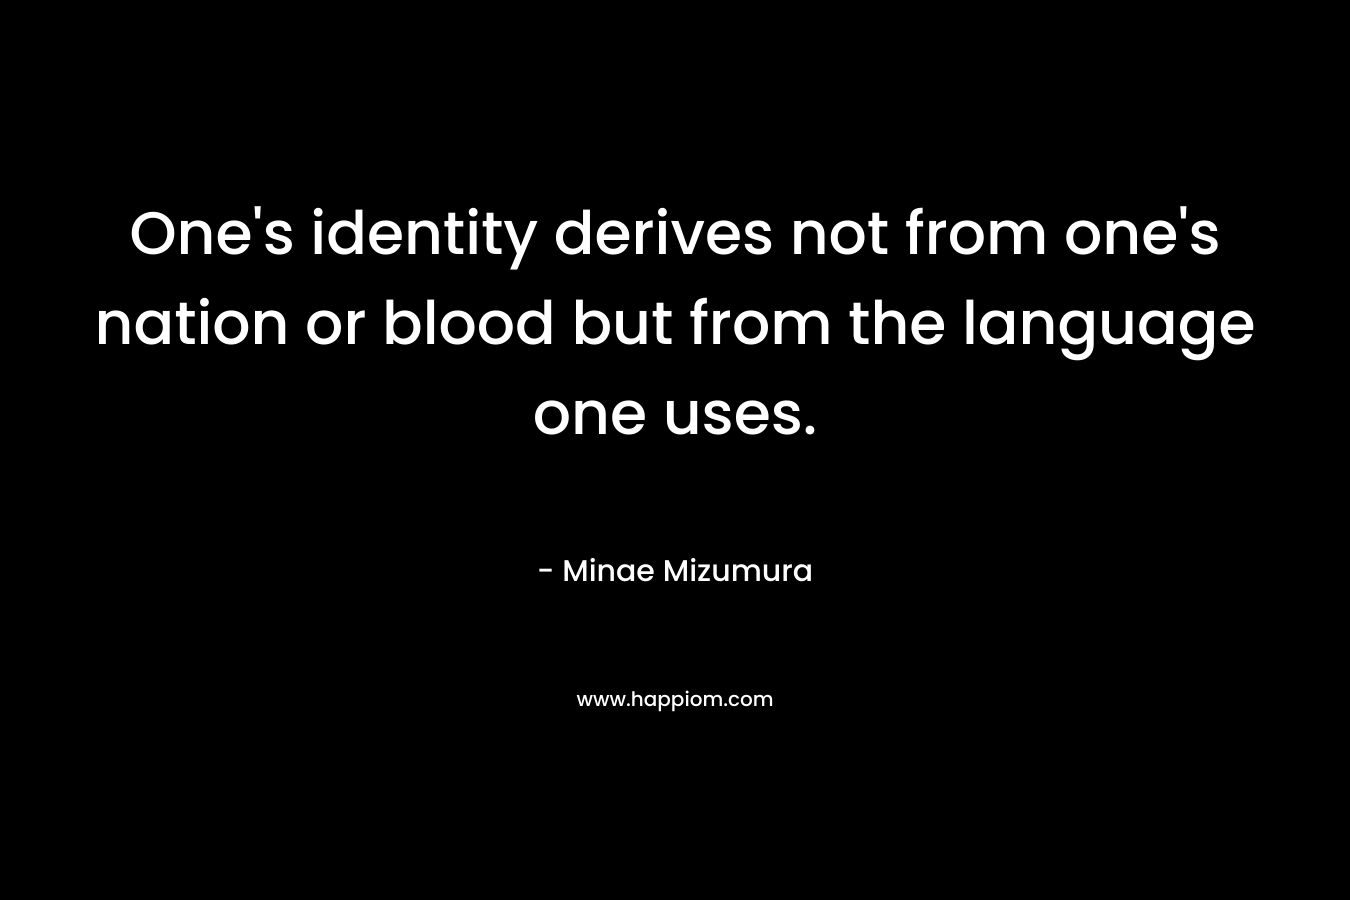 One’s identity derives not from one’s nation or blood but from the language one uses. – Minae Mizumura